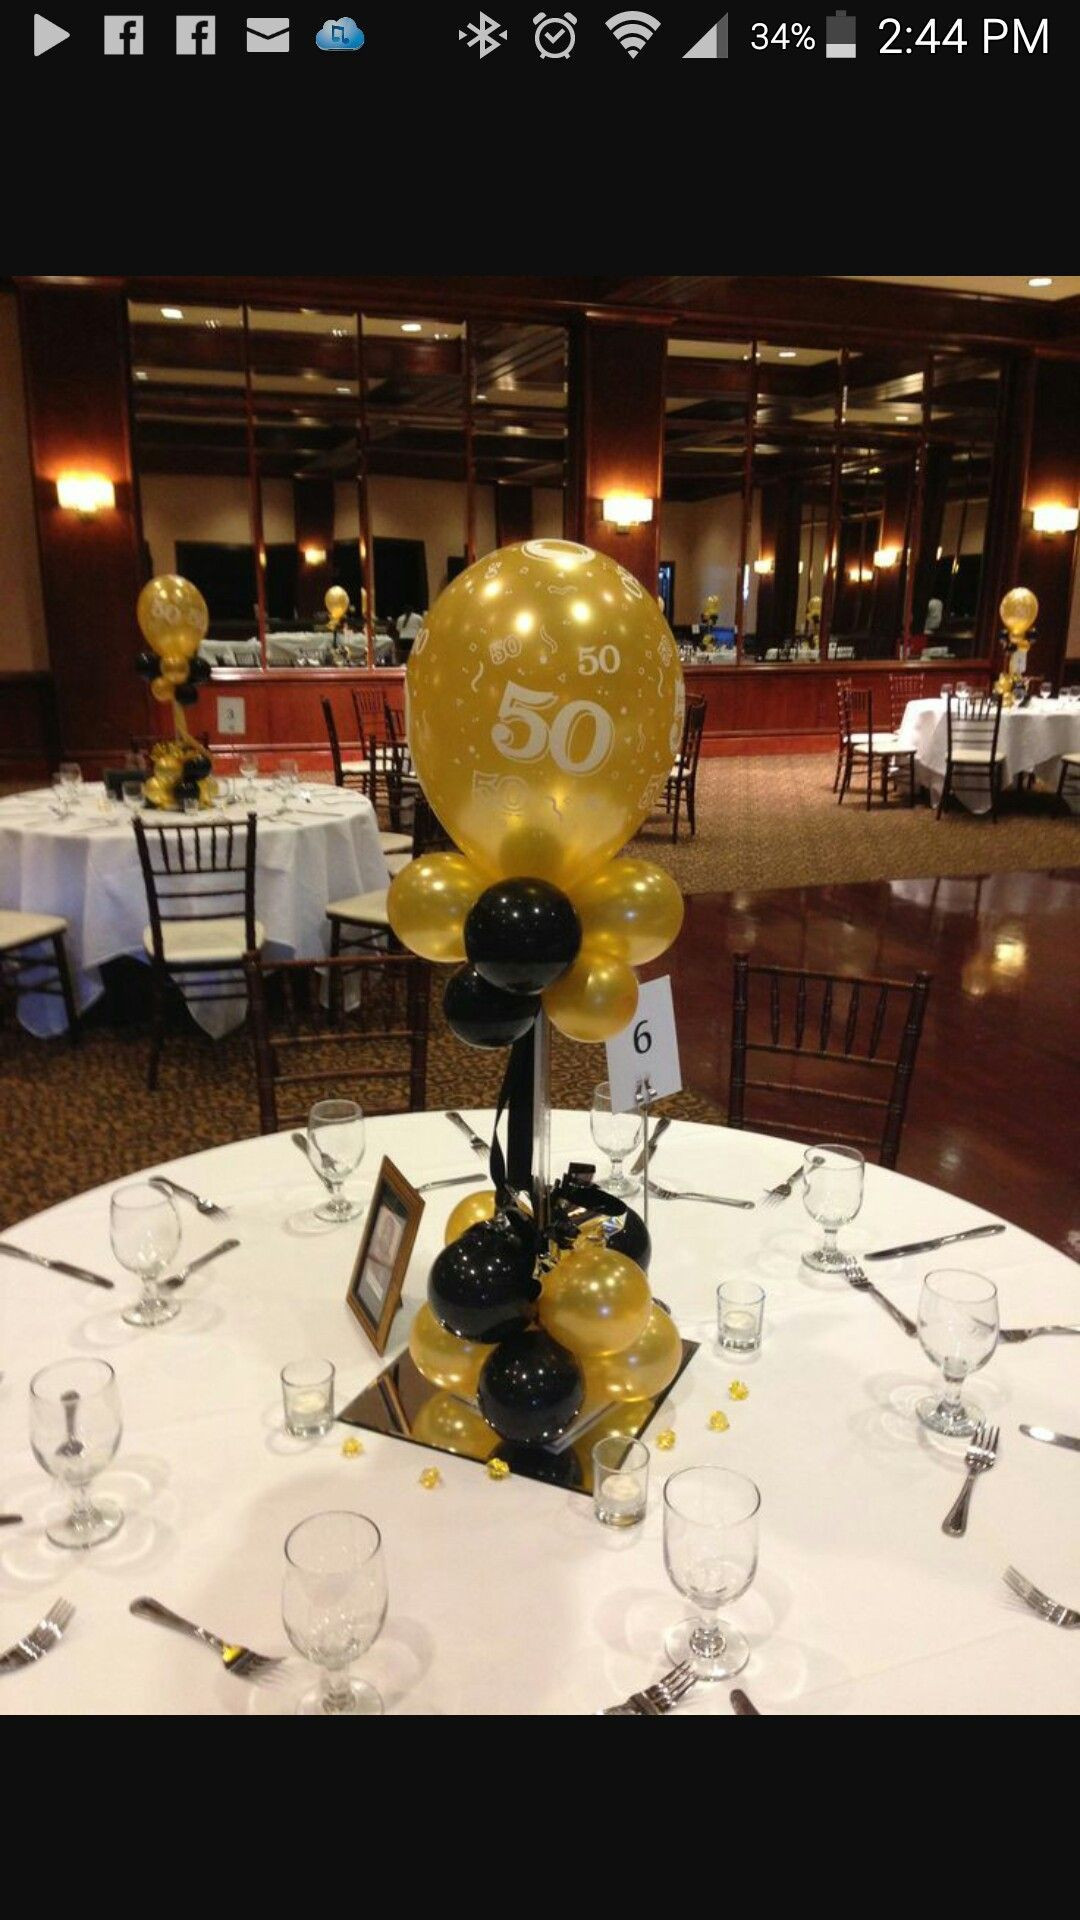 50th Birthday Party Decorations For Men
 Image result for balloon topiary centerpieces for men